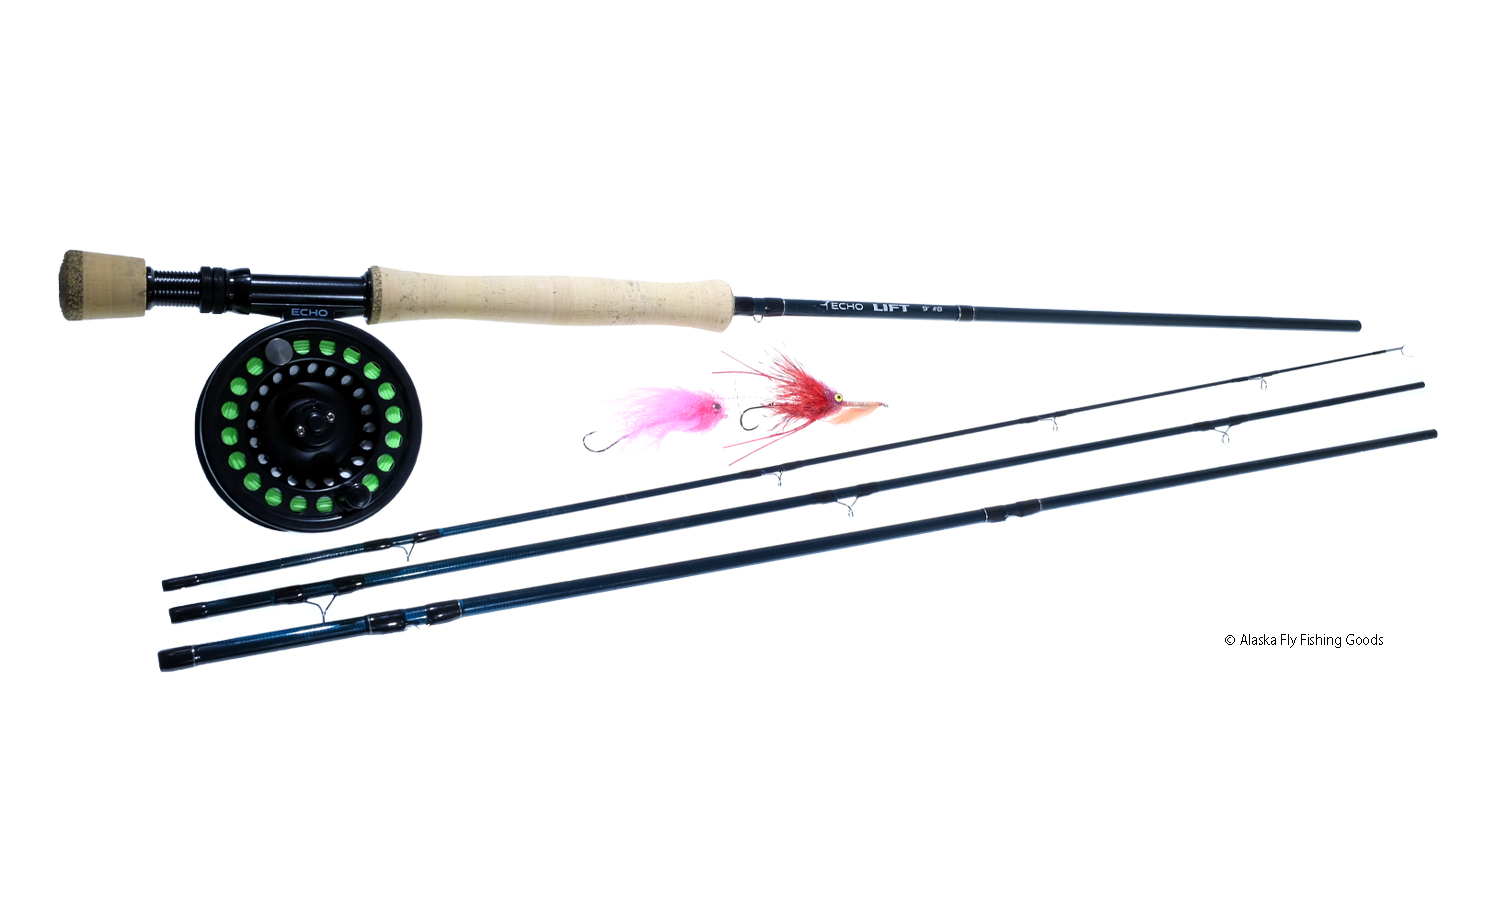 Echo Trout Spey Rods - Echo Fly Rods